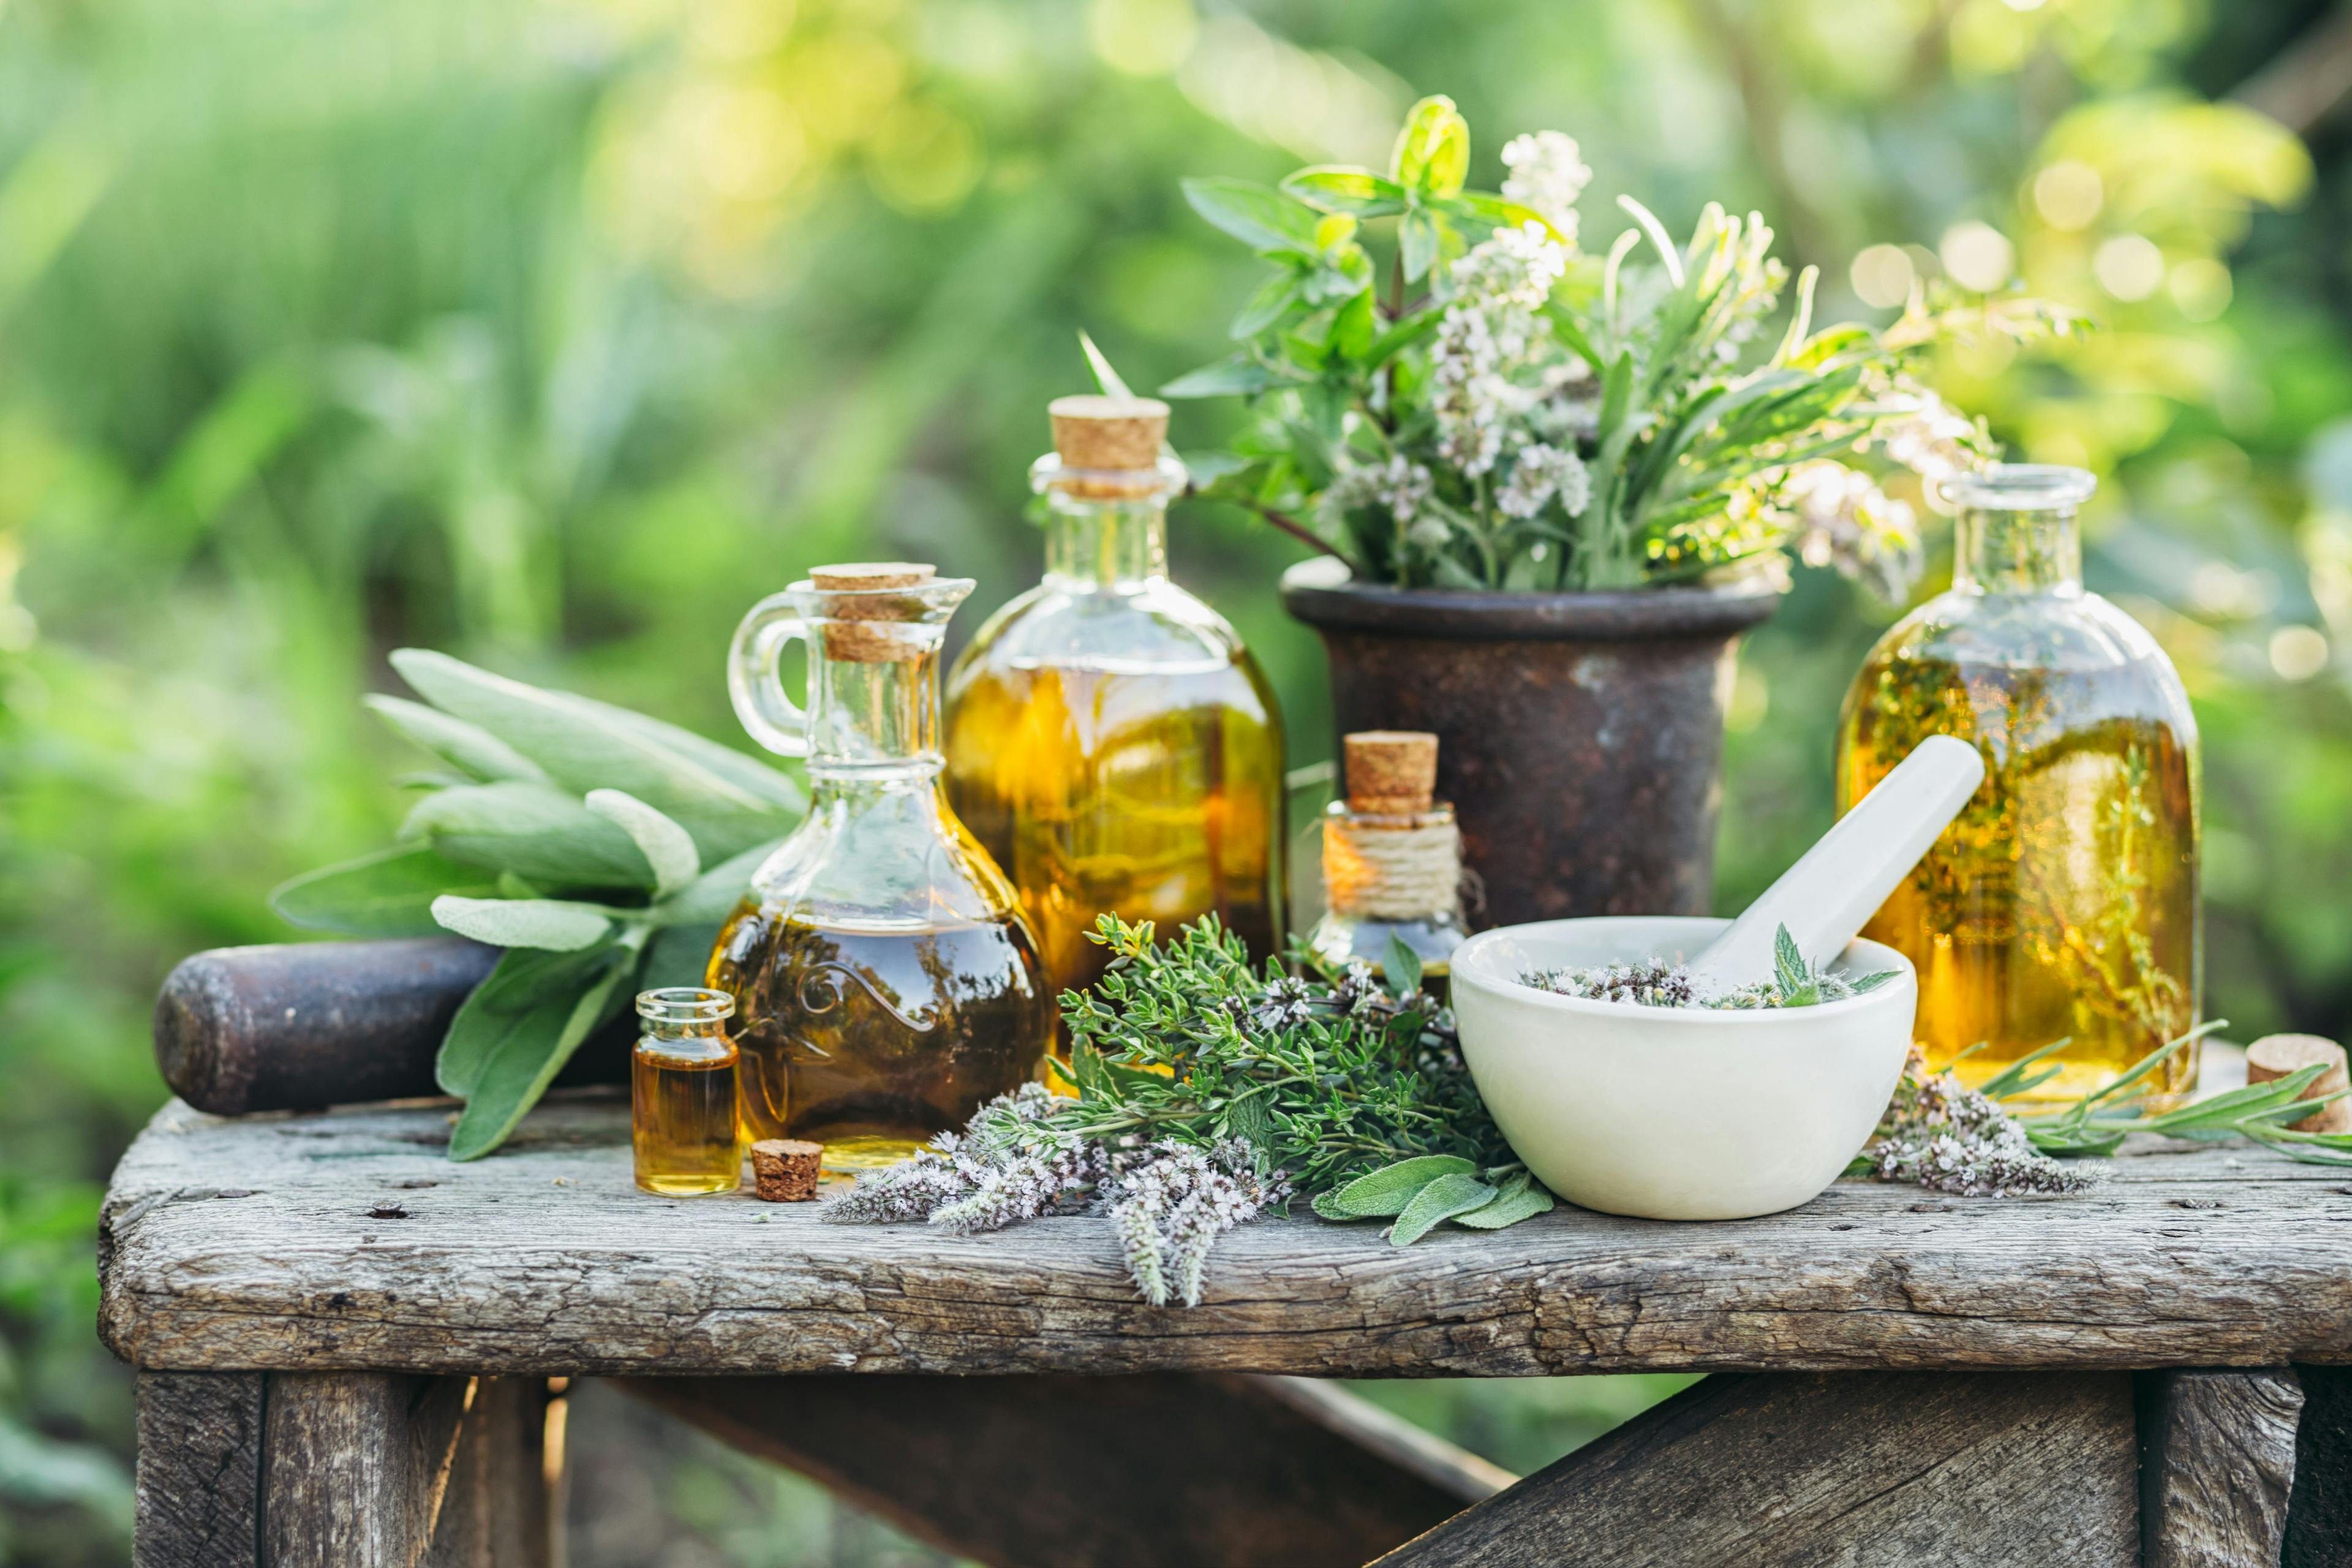 Fresh herbs from the garden and the different types of oils for massage and aromatherapy. | Image Credit: © valya82 - stock.adobe.com